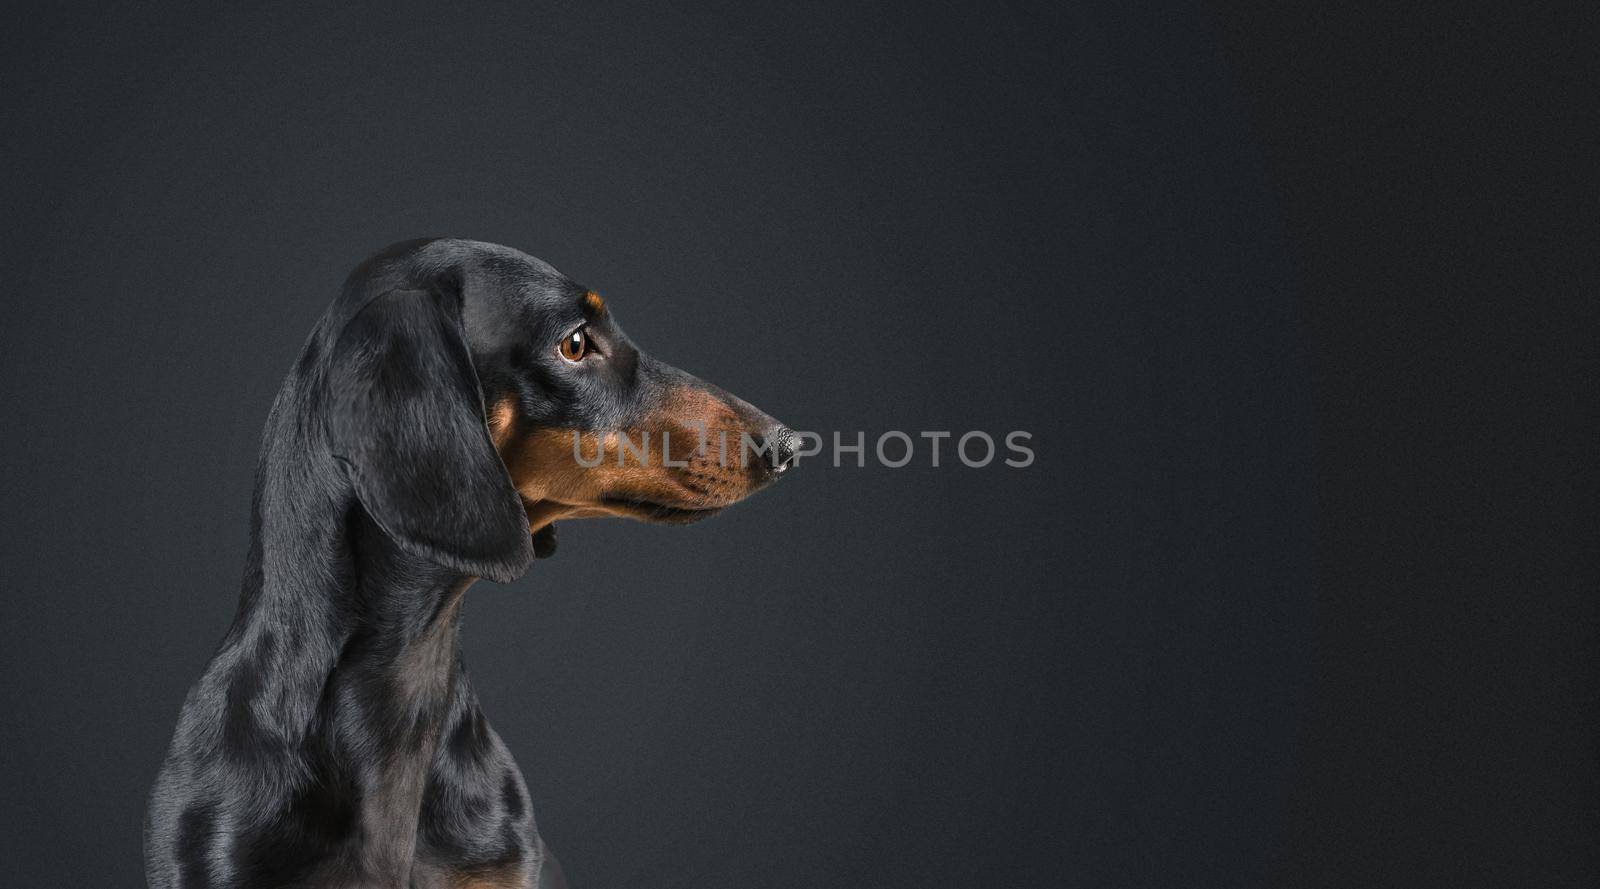 Dog dachshund looking to the side on black background. Space for text in right part of image